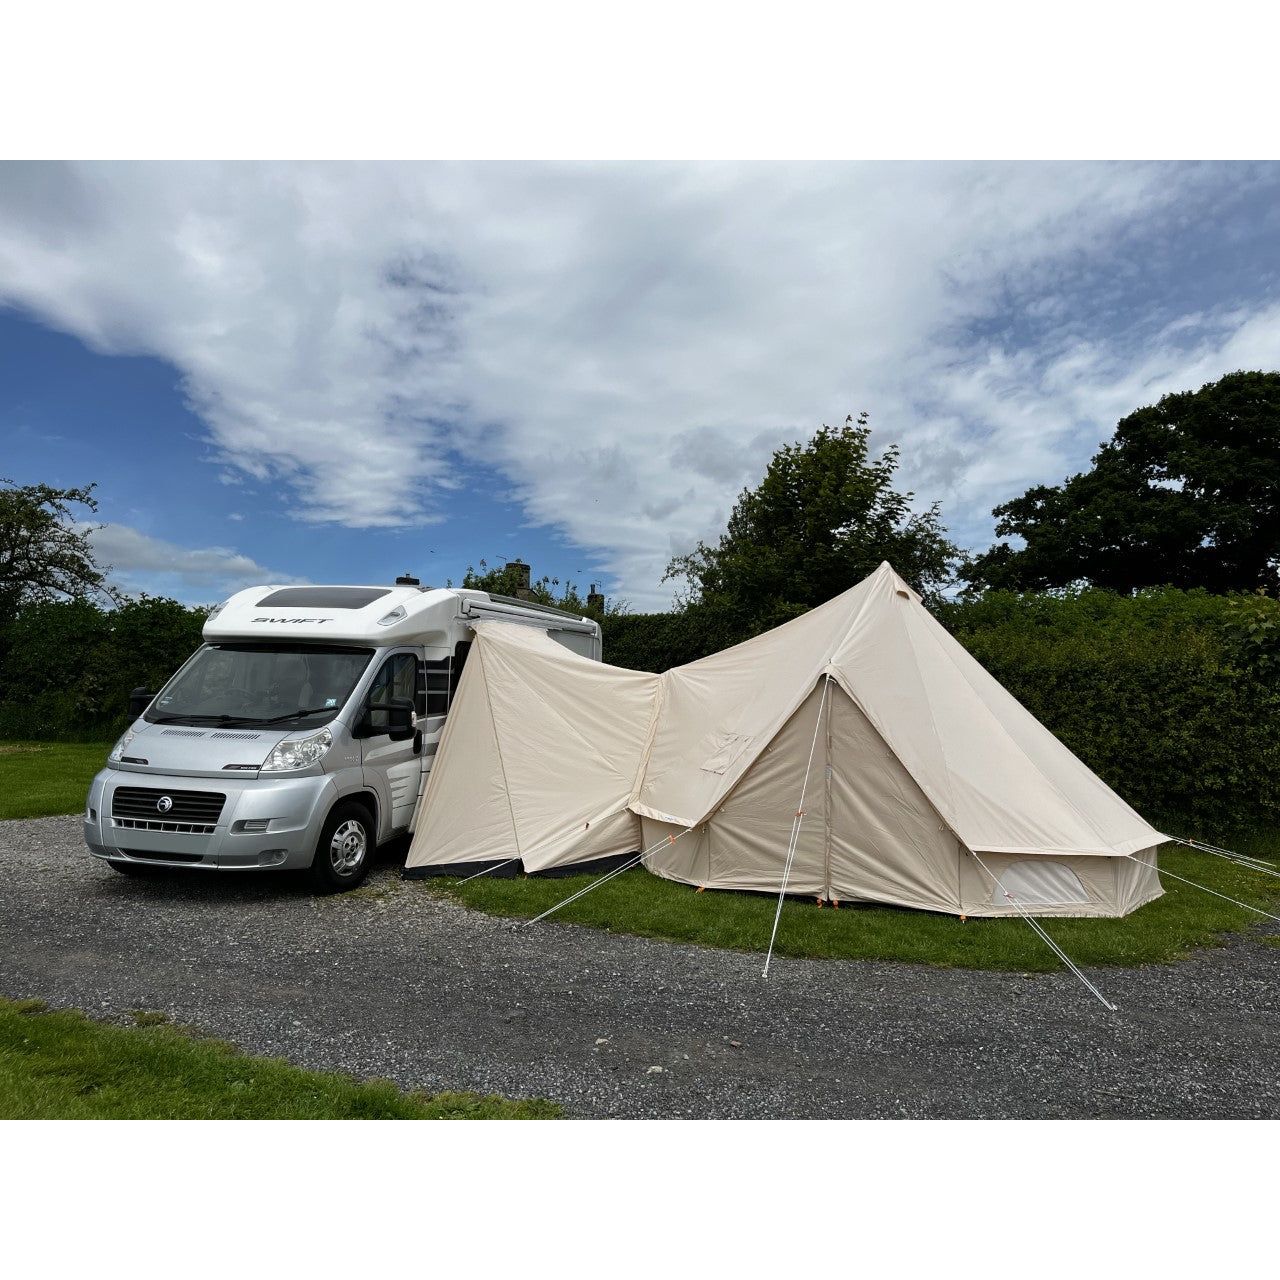 Glawning HT Deluxe High Connection 4 Metre, 2 Door Driveaway Awning ON BACKORDER UNTIL 2024